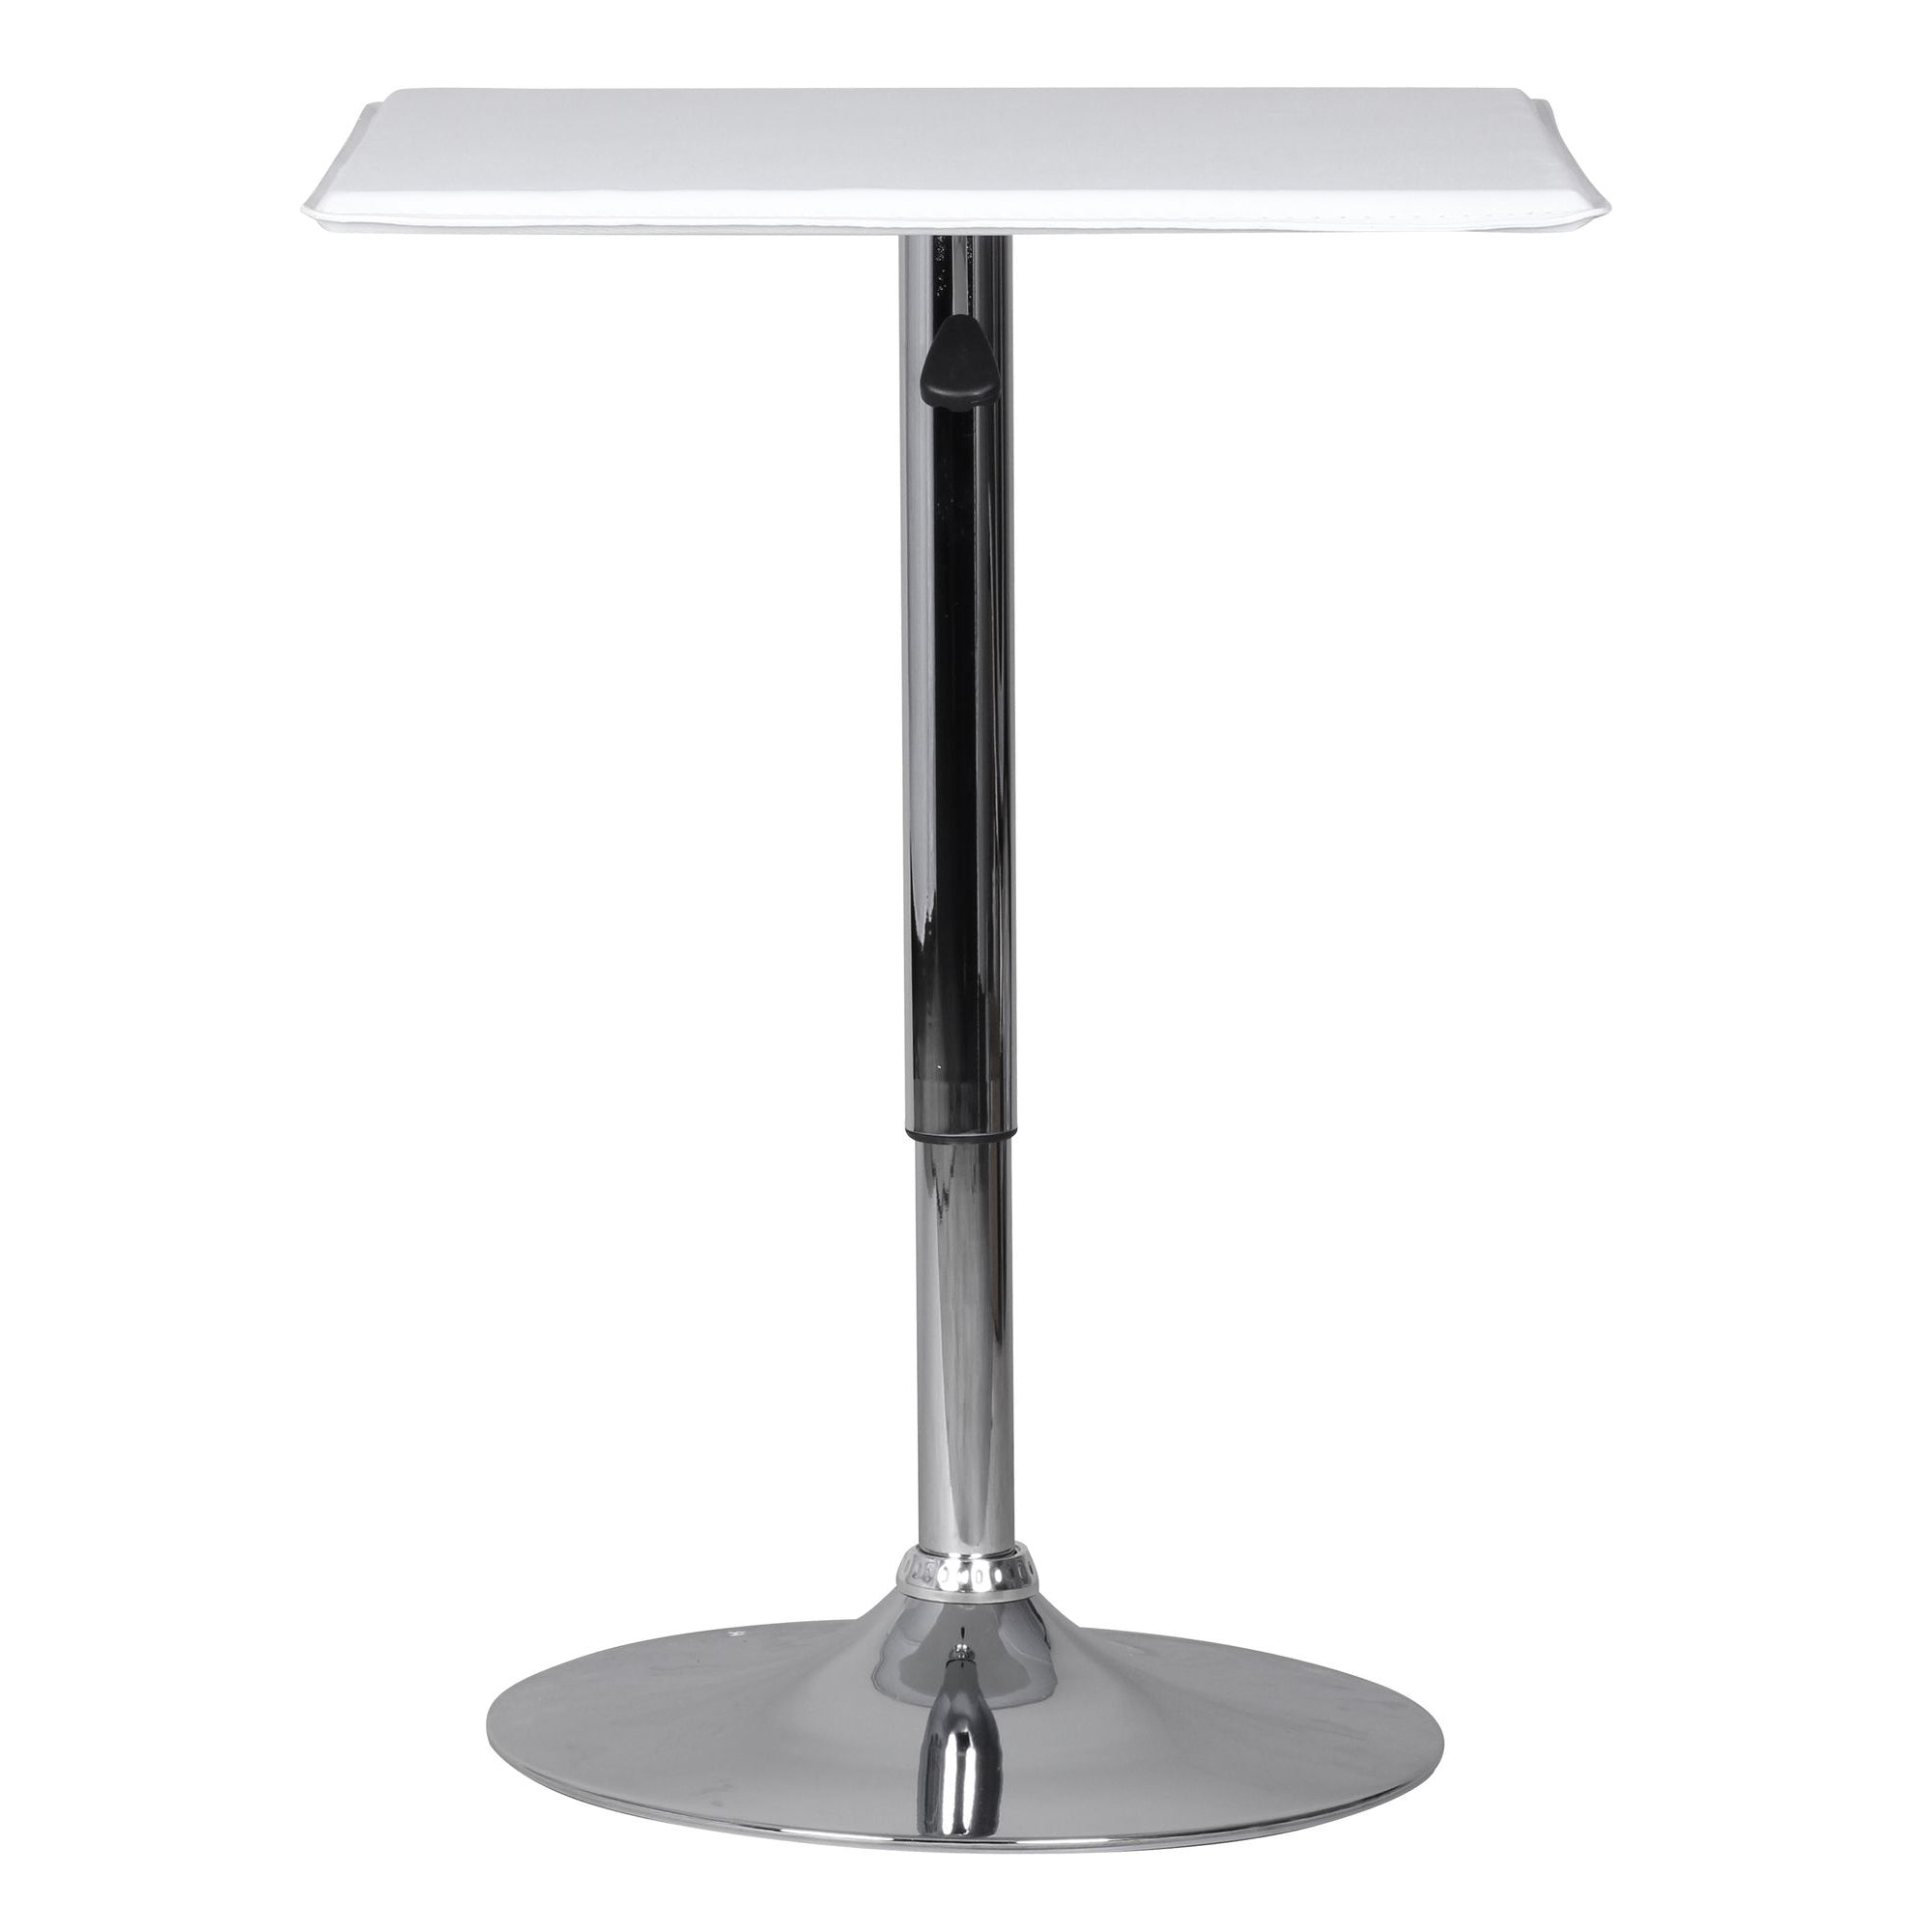 Nancy's Raymond Standing table - Bistro table - 60 x 60 cm - Leather look - White - Chrome - Silver - Square